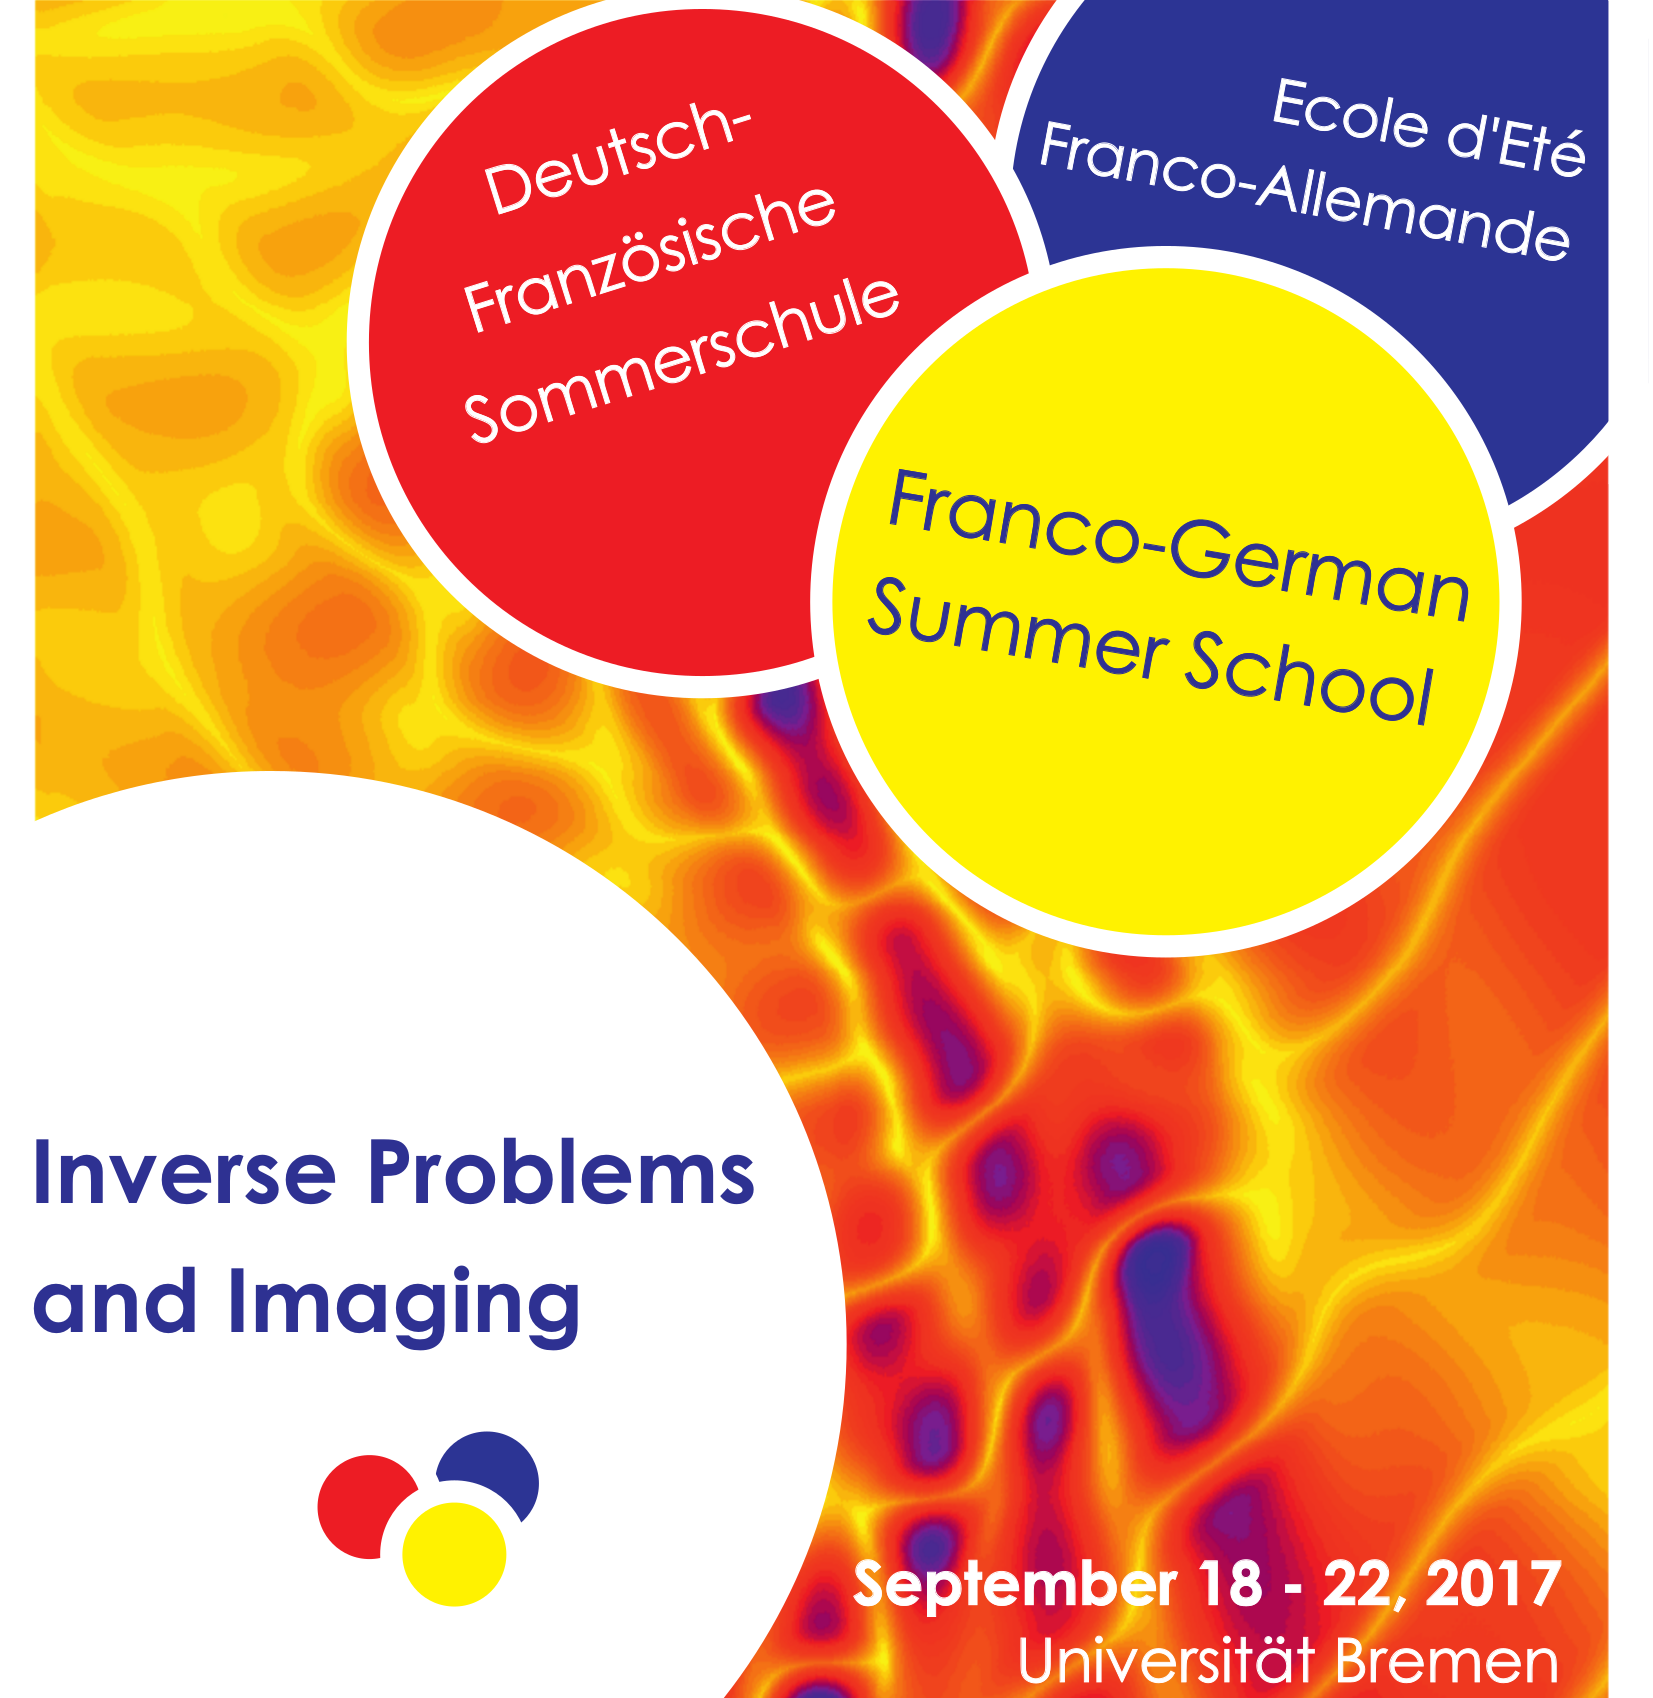 Poster of the franco-german summer school on inverse problems and partial differential equations